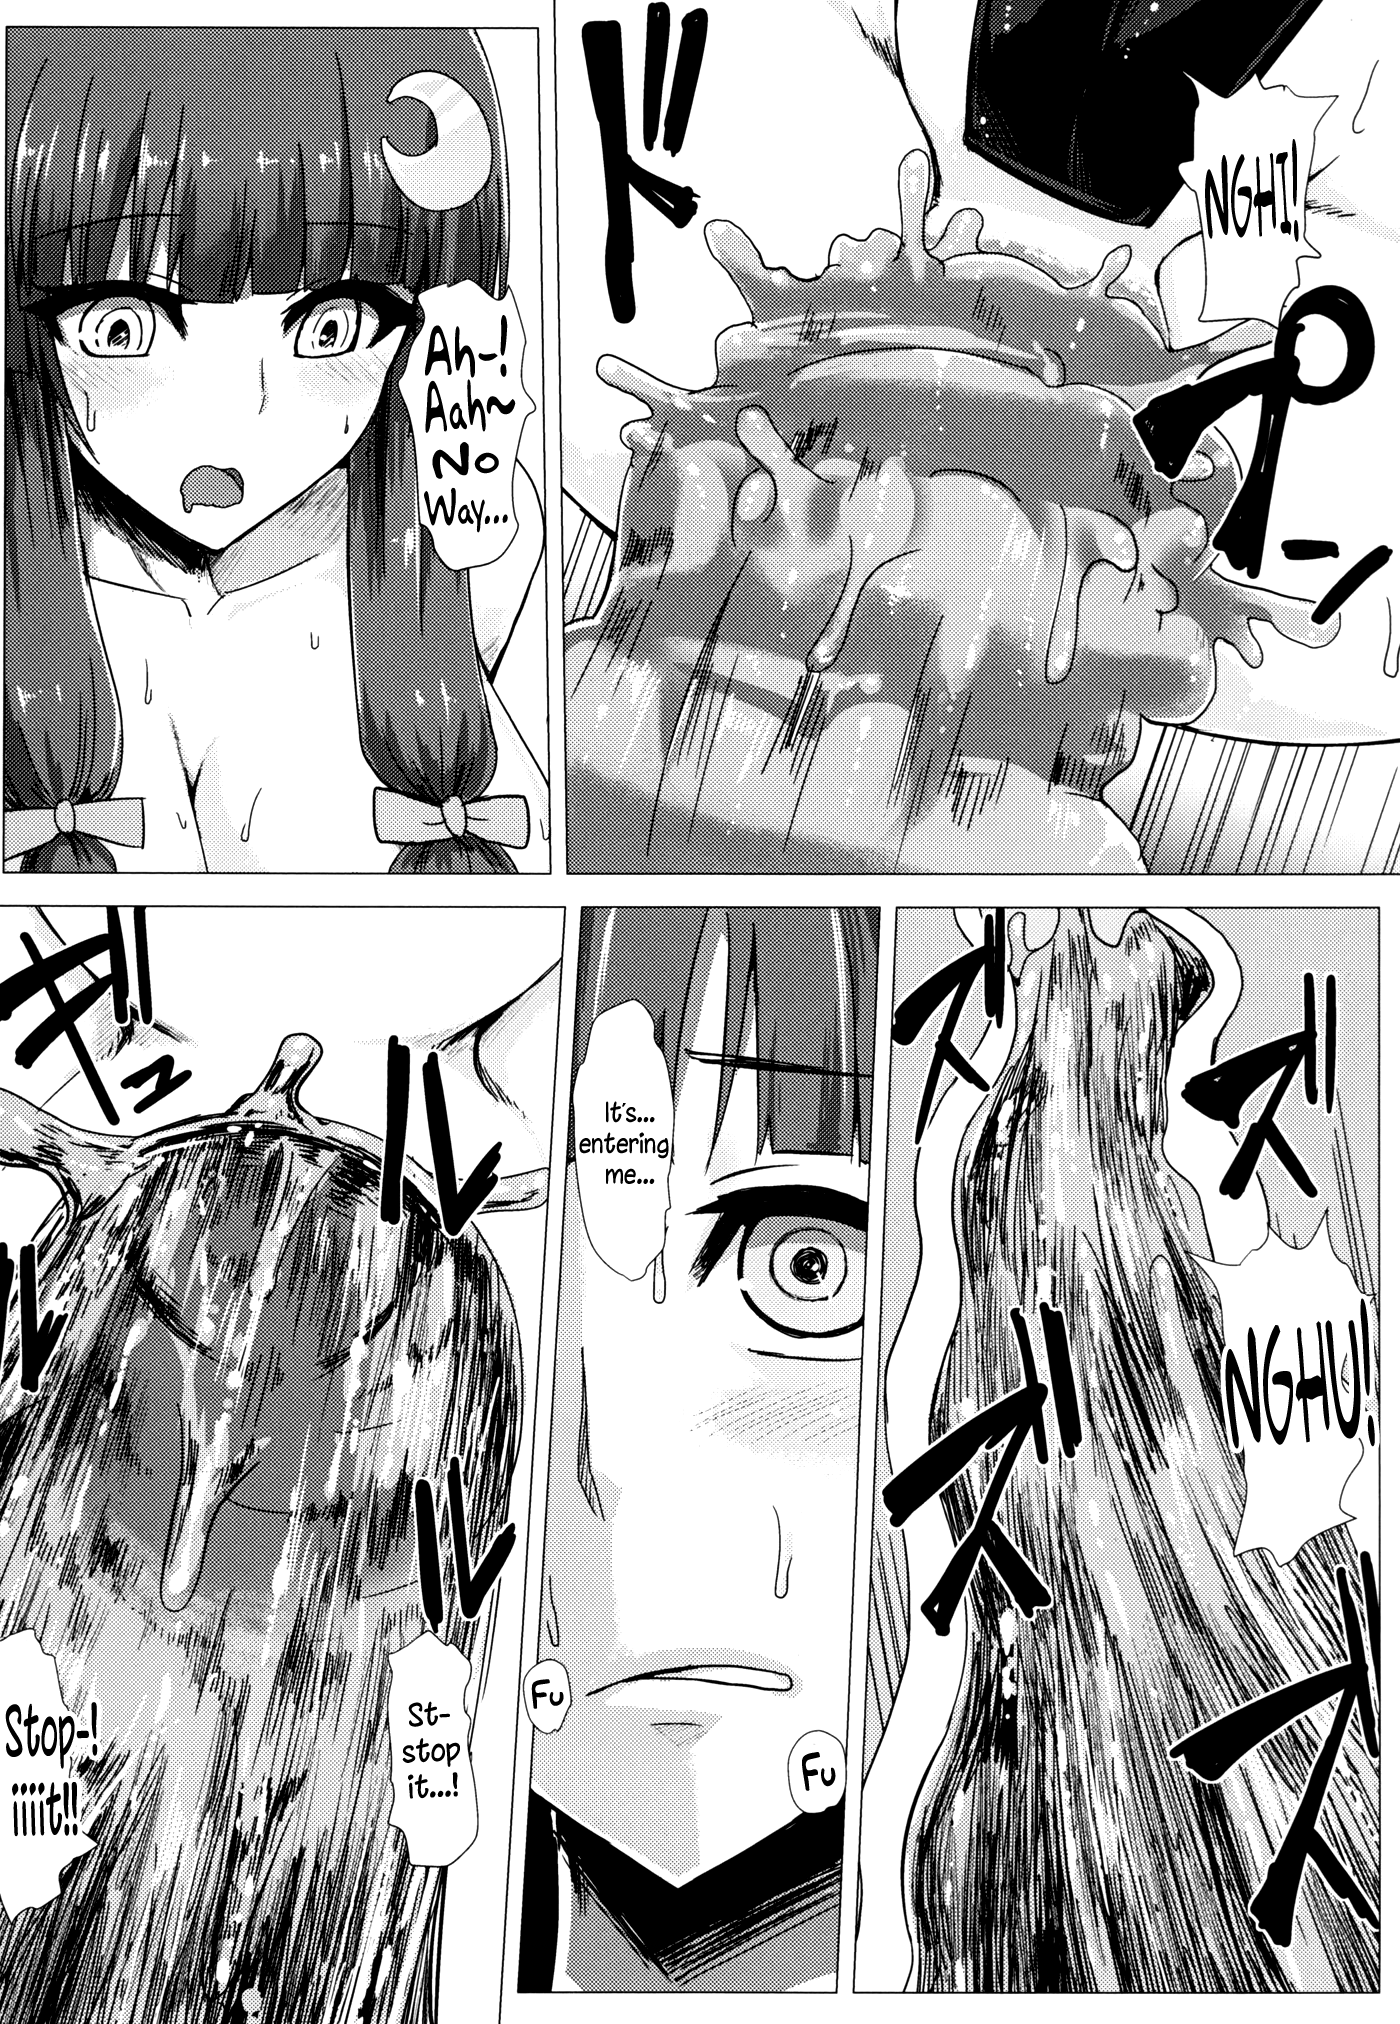 Ass Patchy Patchy hentai manga picture 13